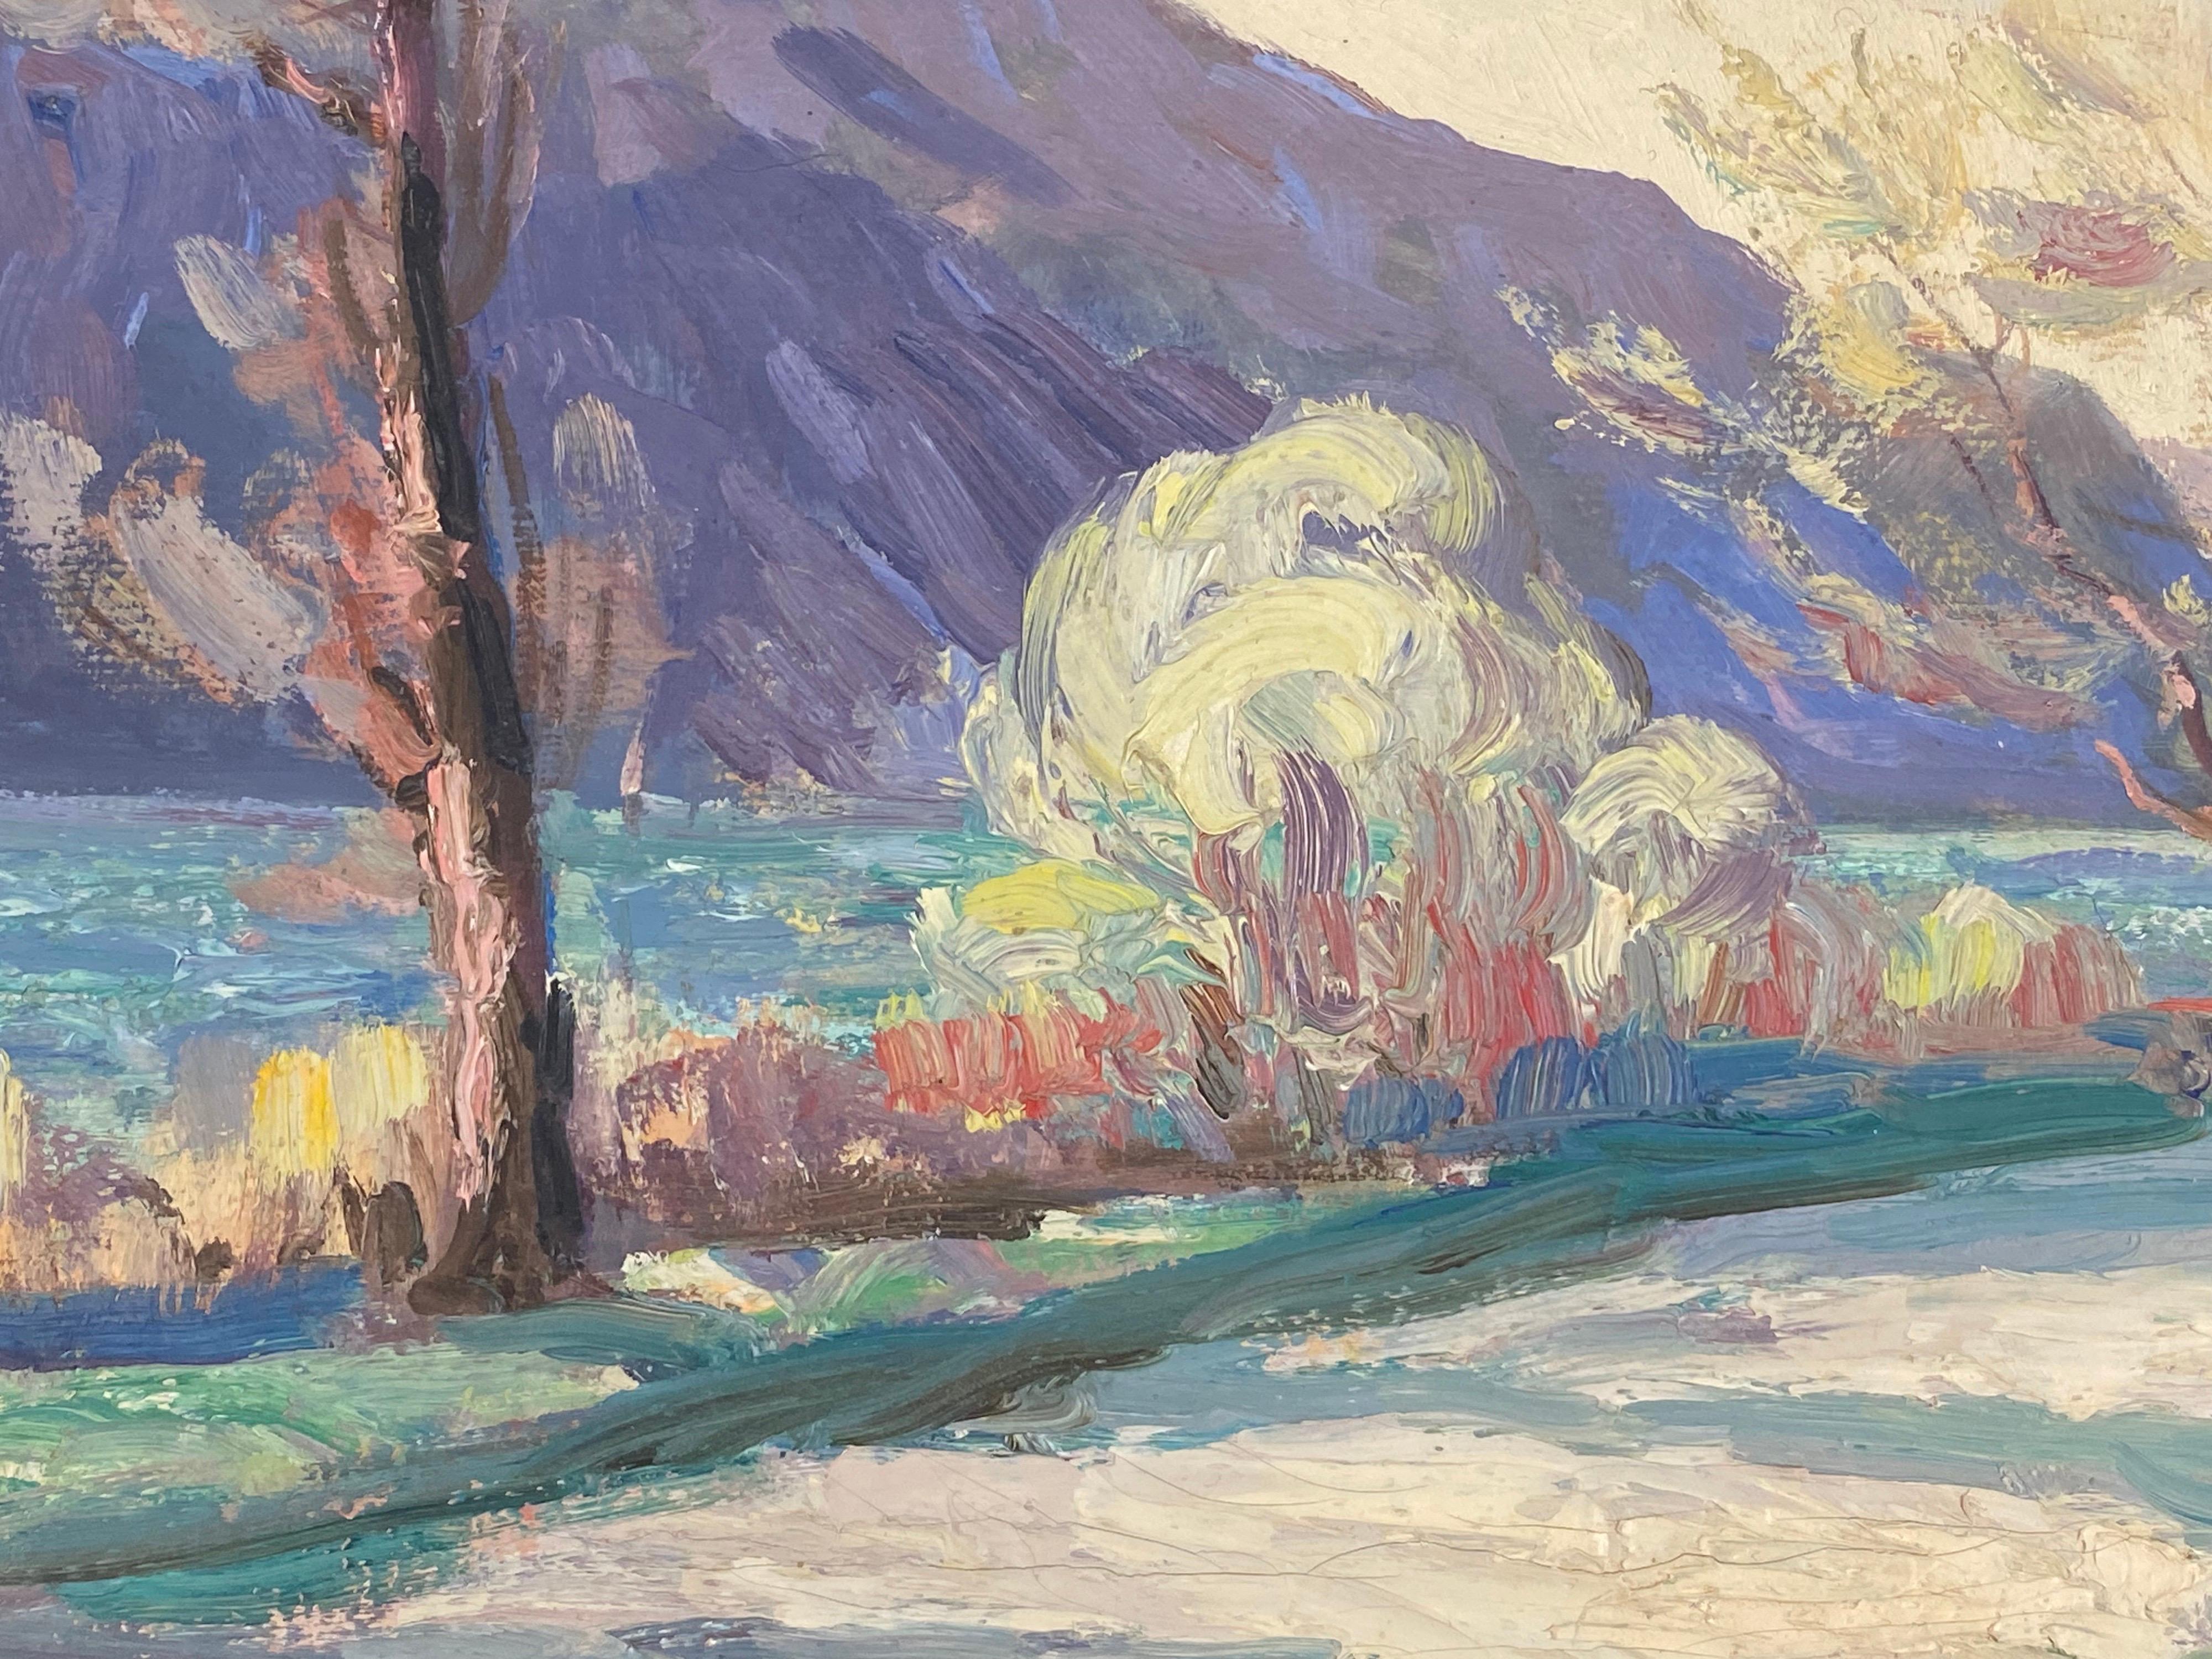 Artist/ School: Leon Hatot (French 1883-1953), 

Title: Impressionist oil painting 

Medium: oil painting on thick paper, unframed.

Size:  painting: 9.5 x 12.5 inches.

Provenance: all the paintings we have for sale by this artist have come from